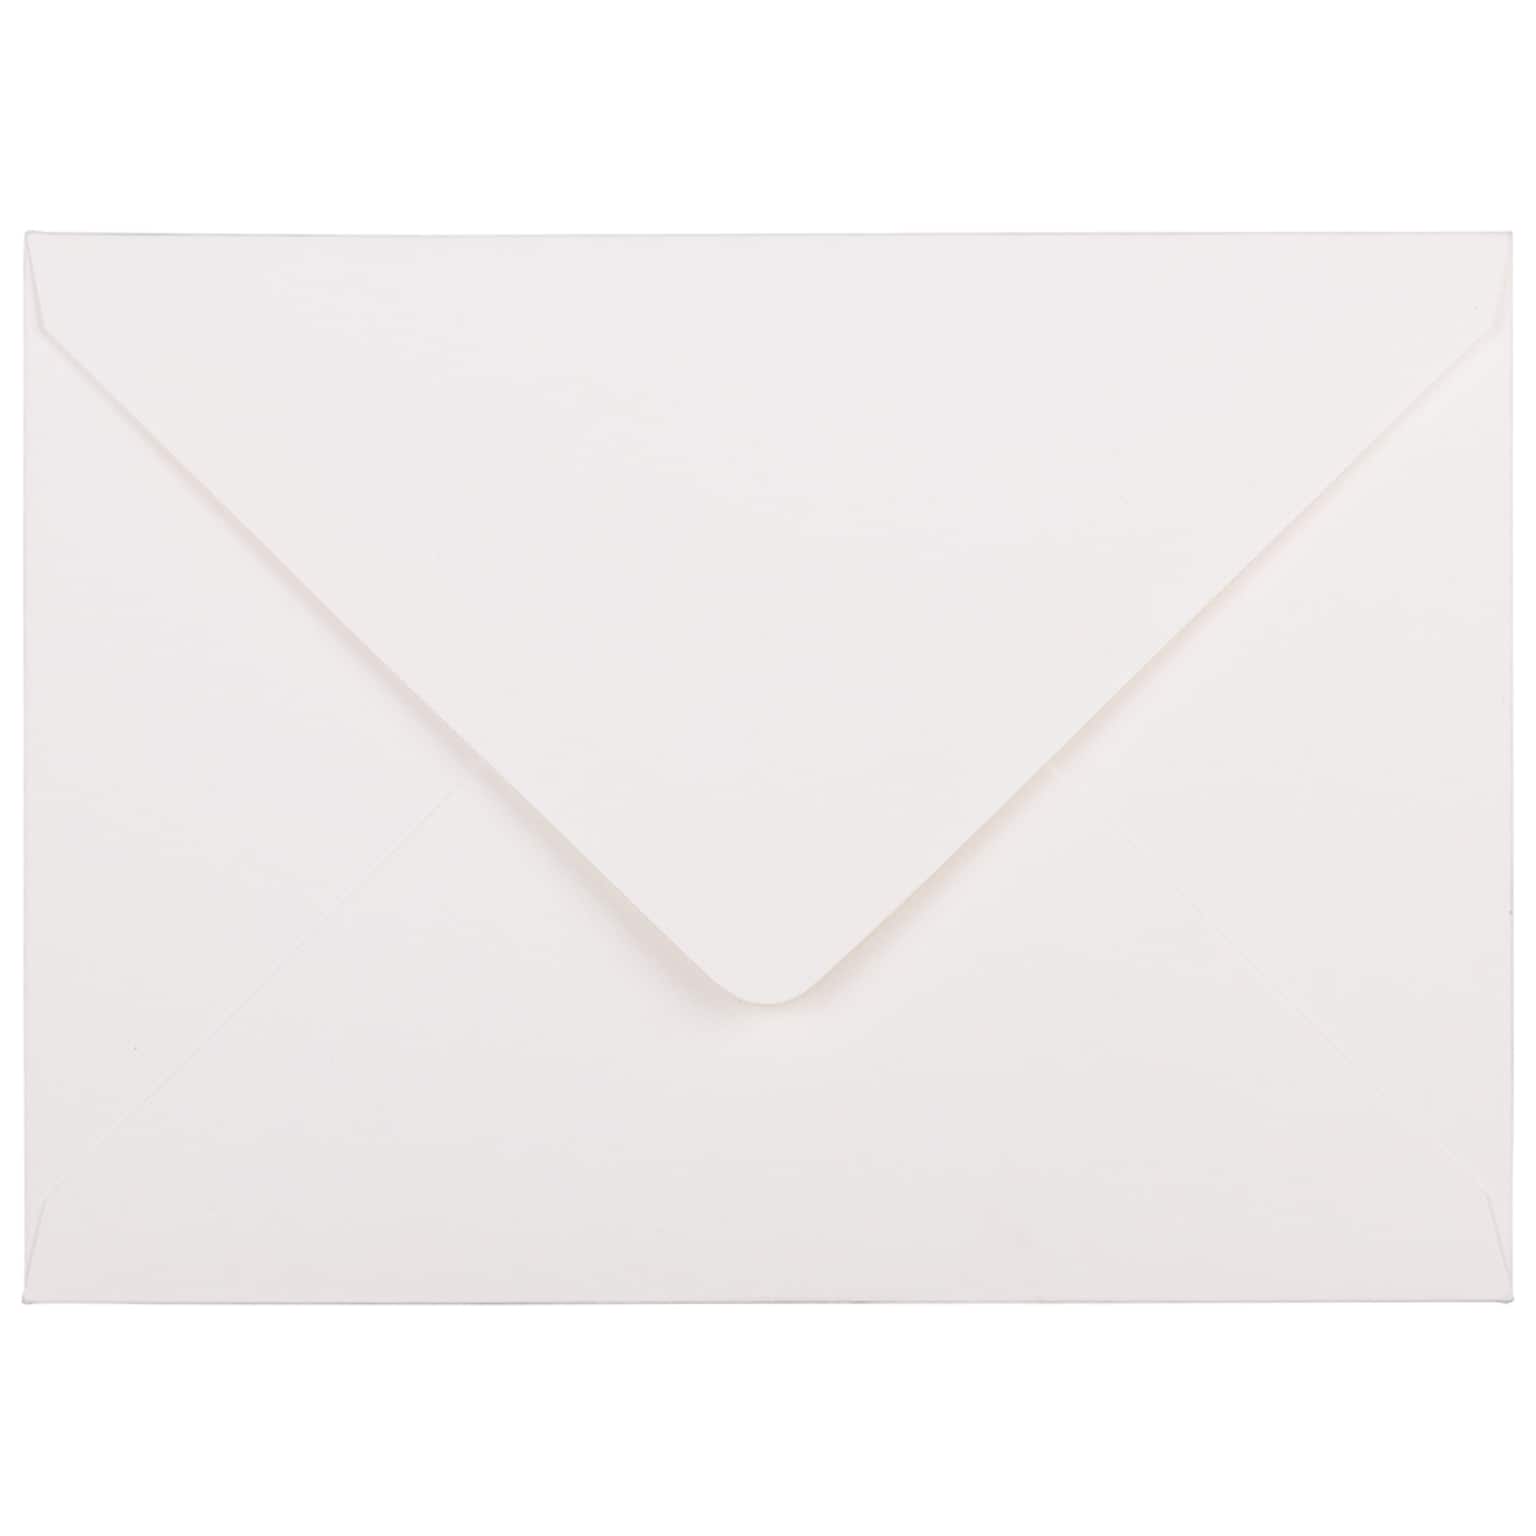 JAM Paper A7 Strathmore Invitation Envelopes with Euro Flap, 5.25 x 7.25, Bright White Laid, 25/Pack (1921397)